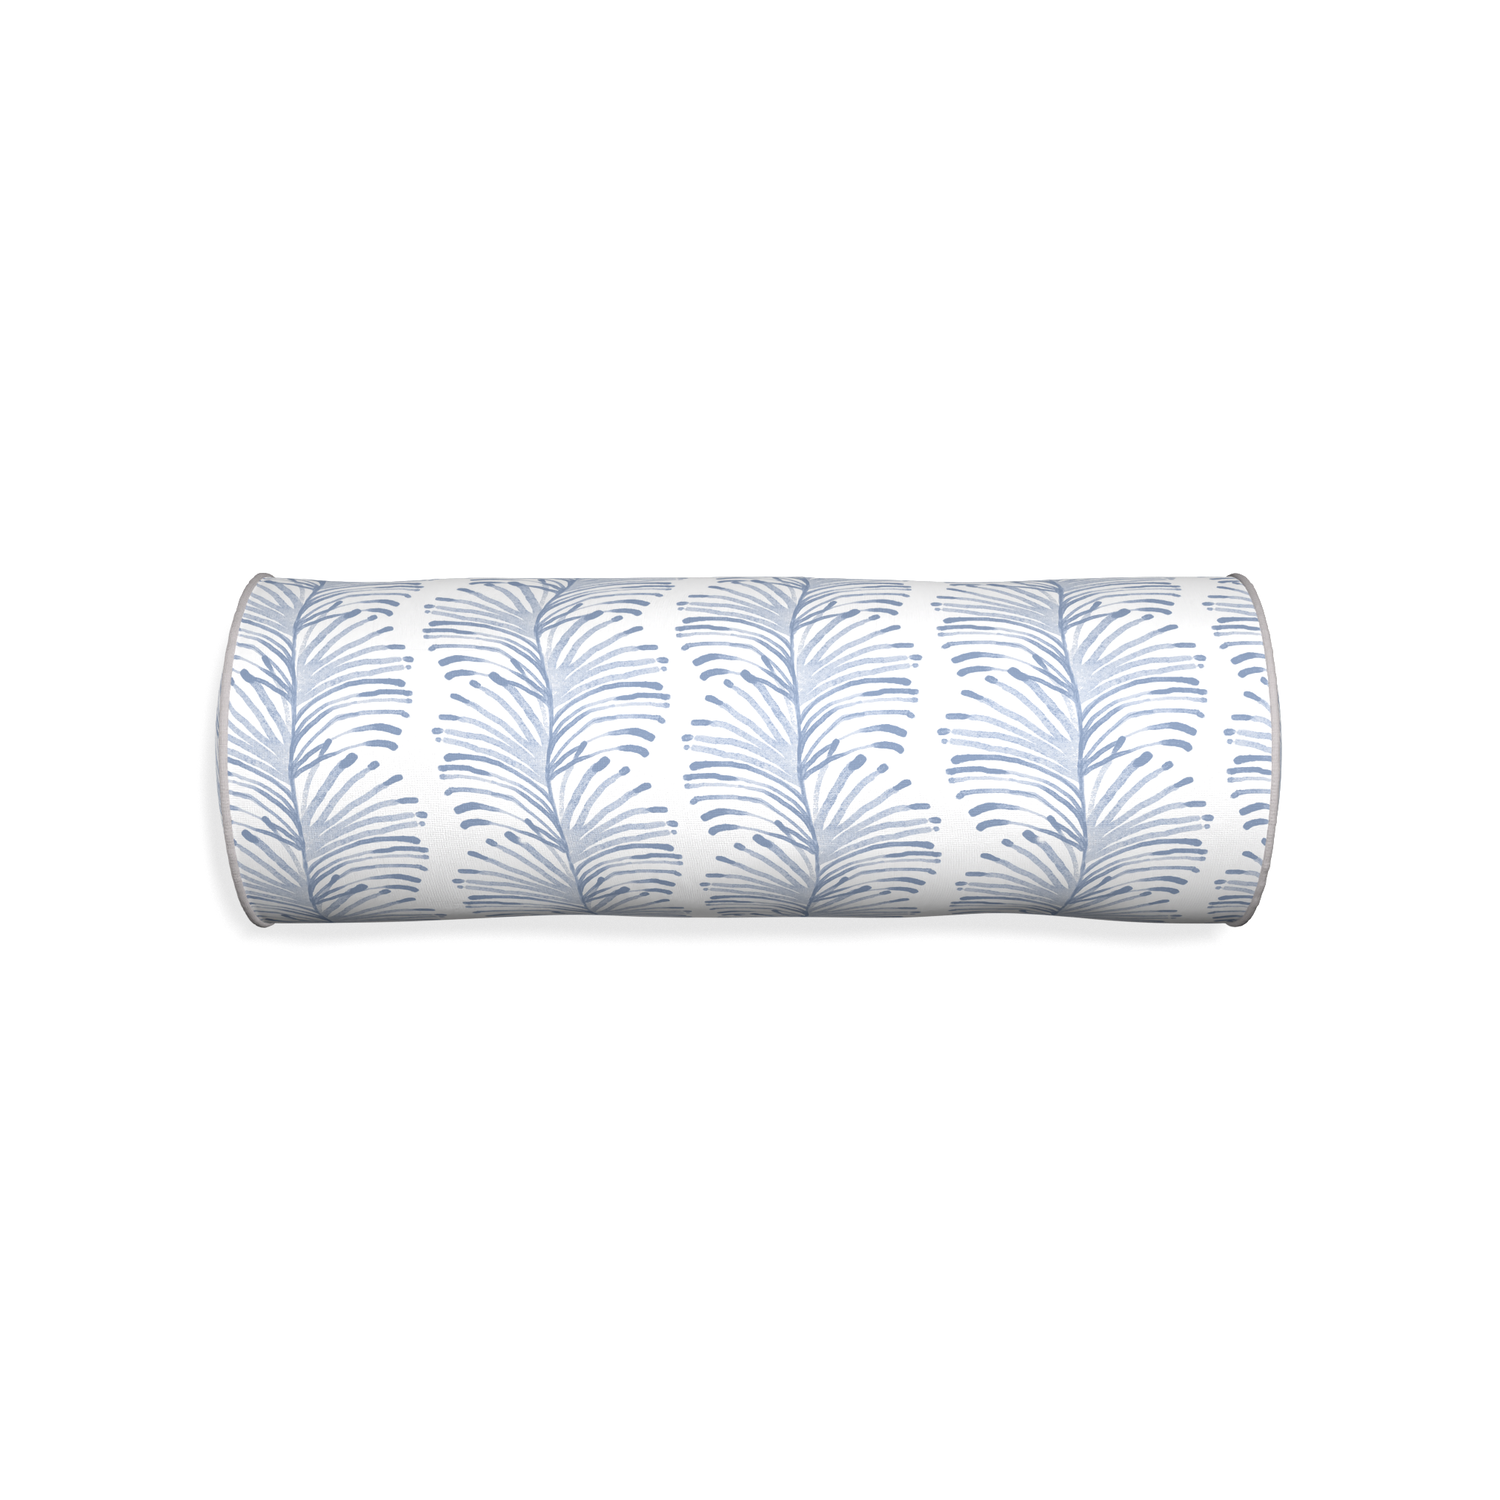 Bolster emma sky custom sky blue botanical stripepillow with pebble piping on white background